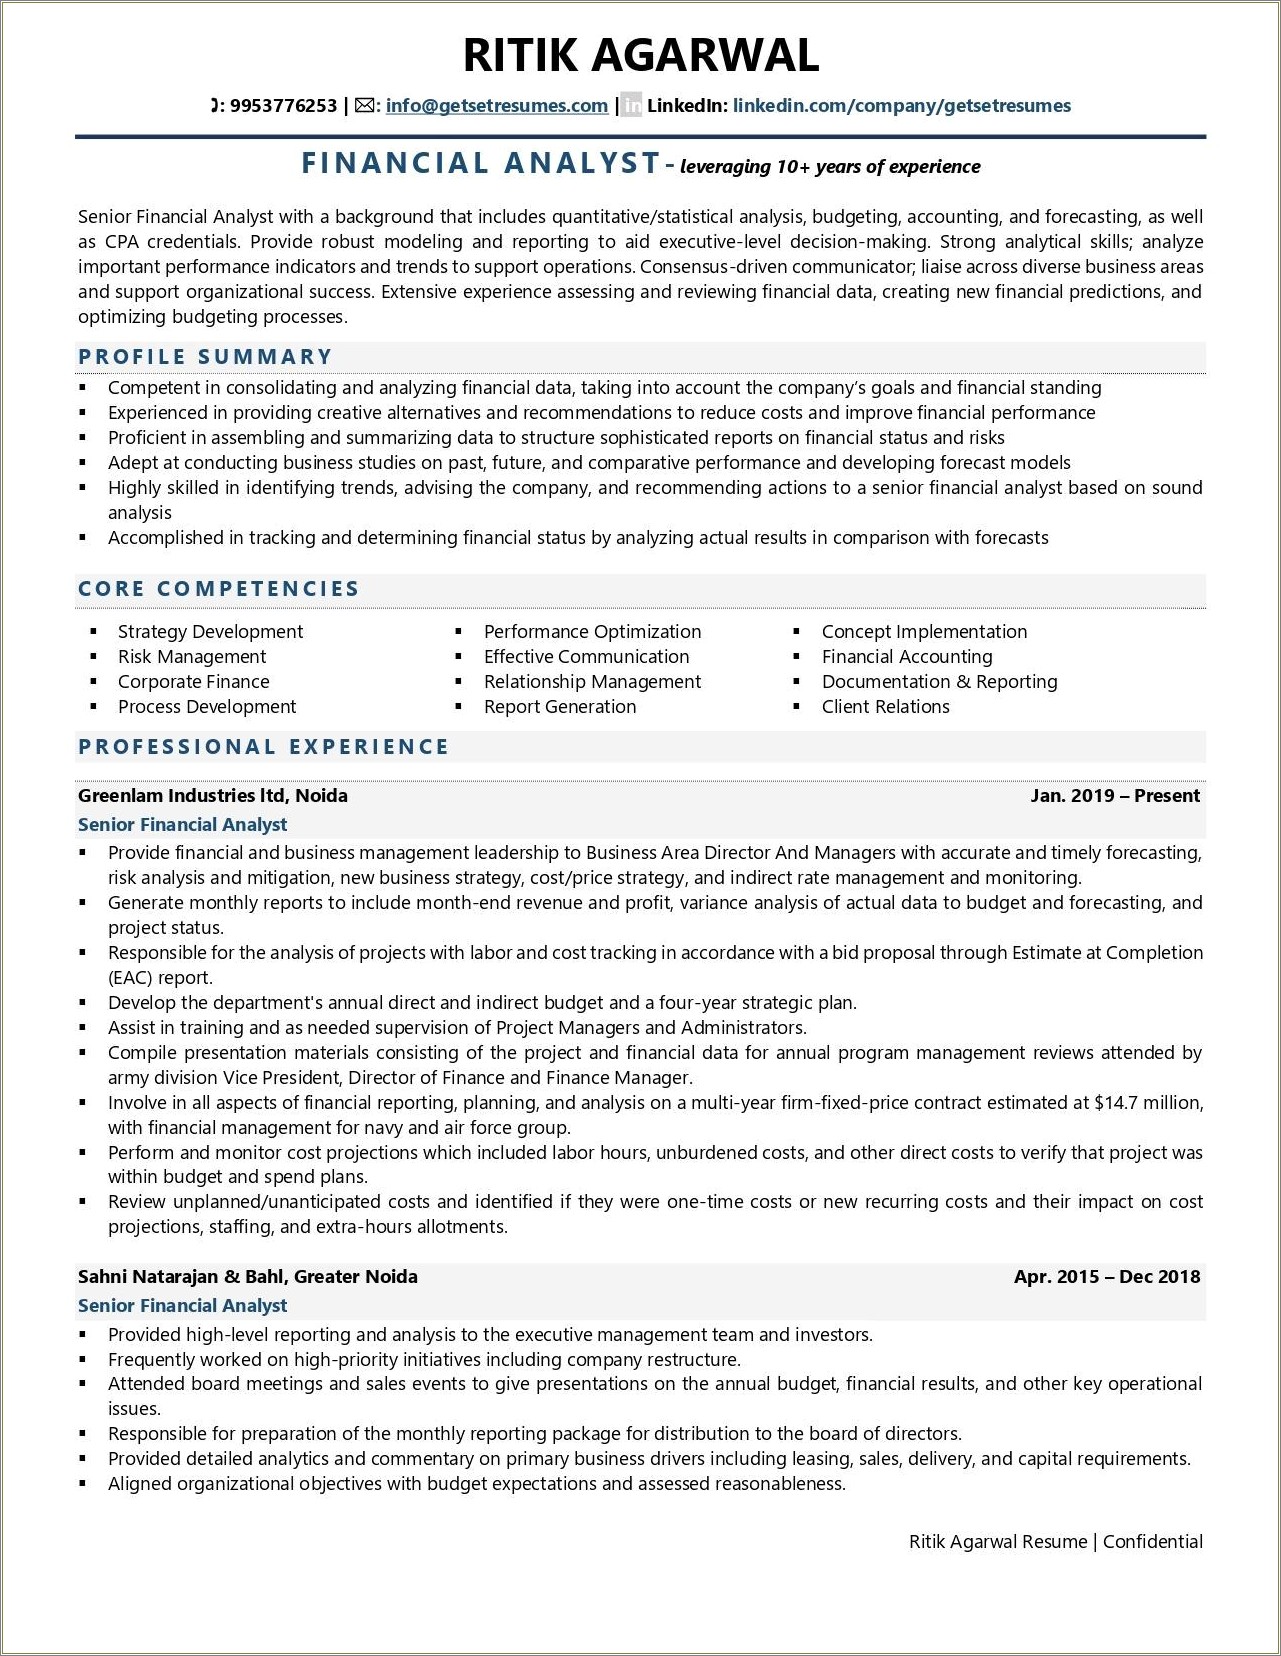 Oeprations Manager To Financial Analyst Resume